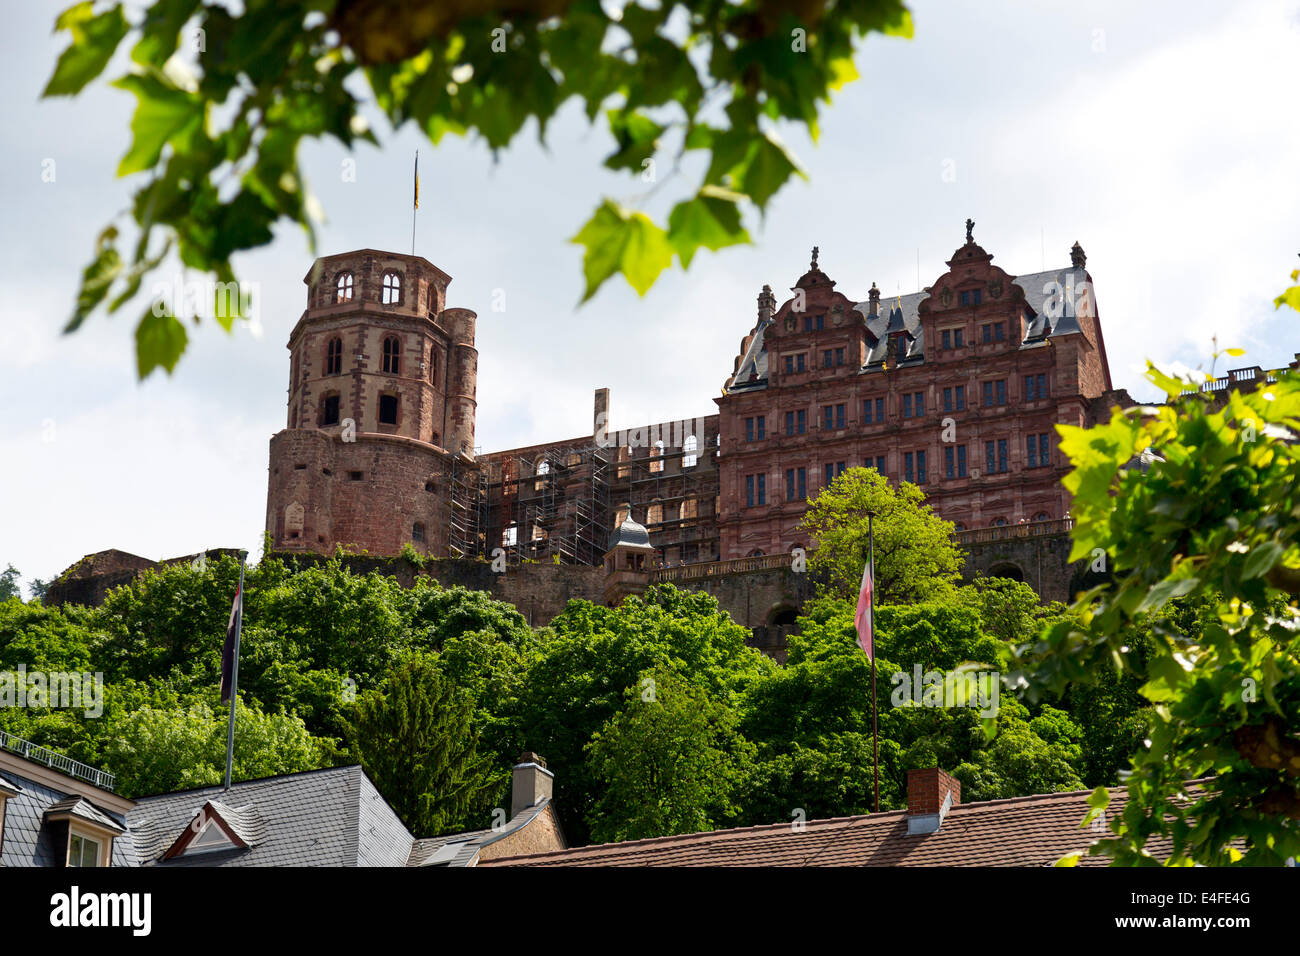 View onto the Castle in Heidelberg, Germany Stock Photo